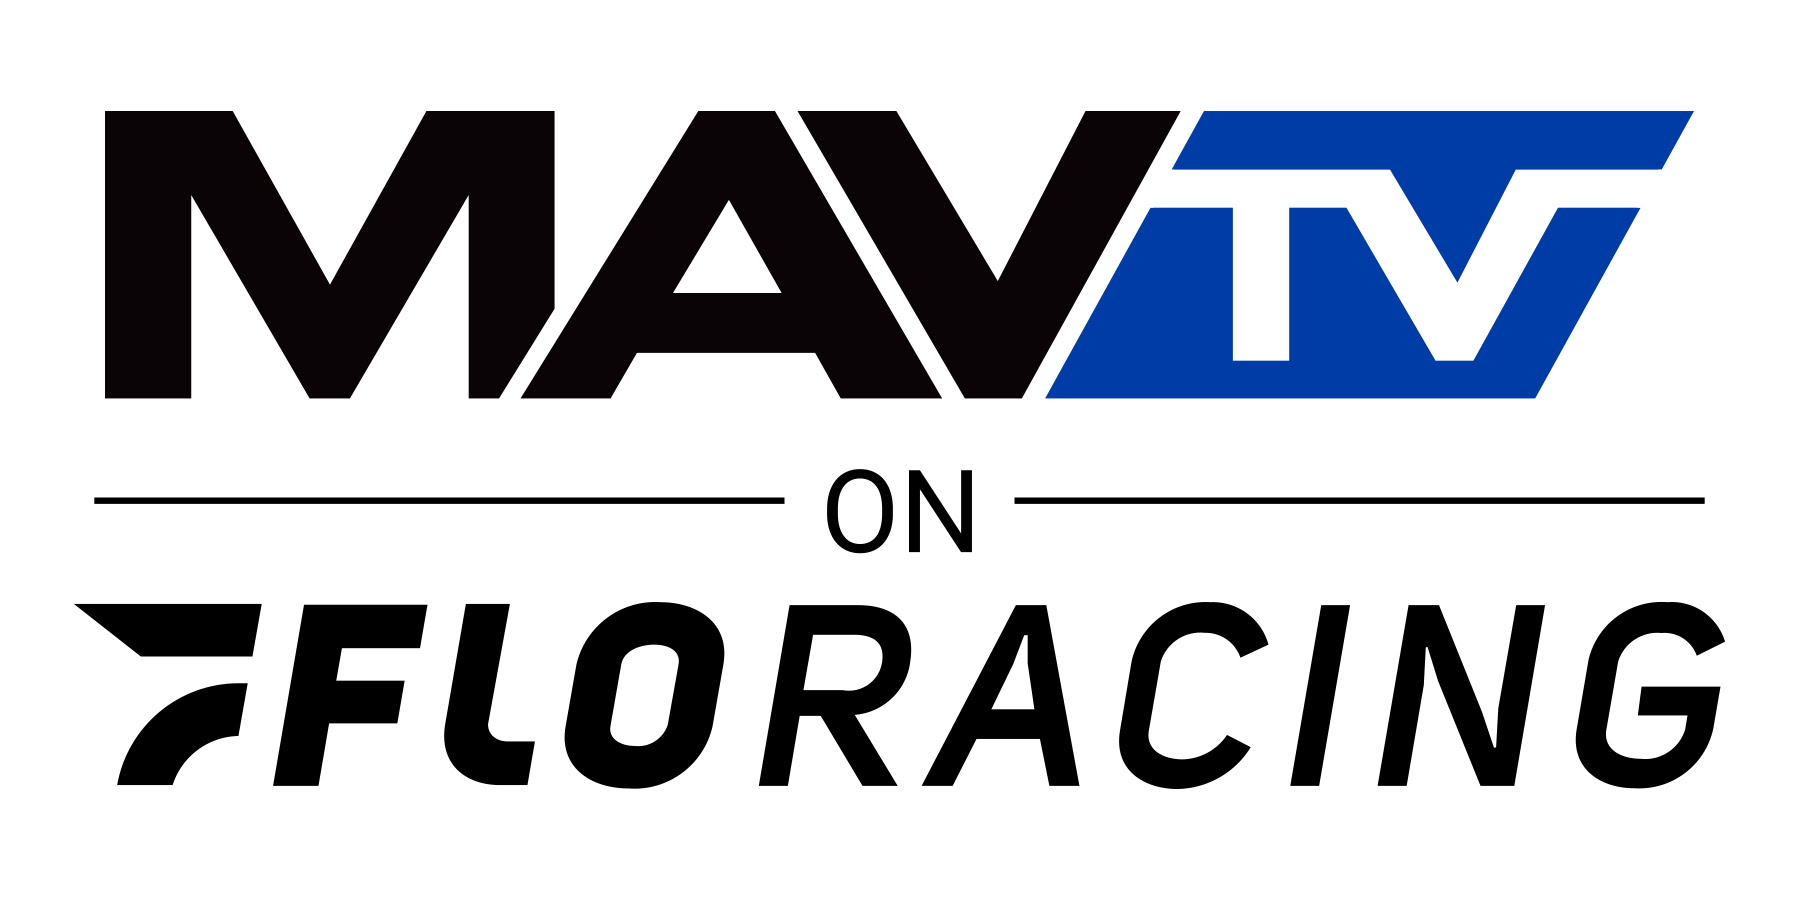 MAVTV Plus Completes Transition to FloRacing